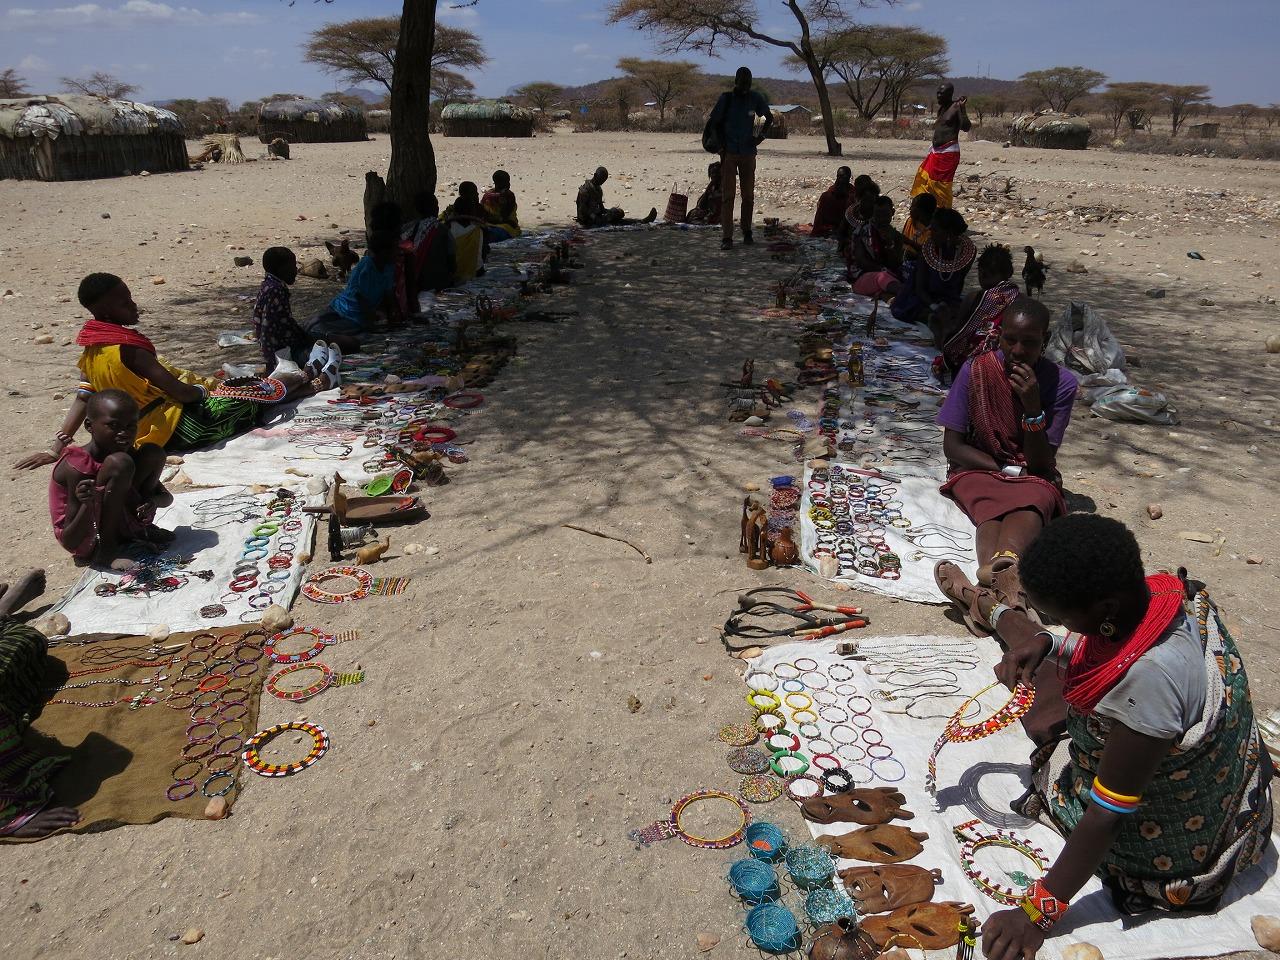 Samburu women selling crafts in a "traditional village" (photo credit: the author)